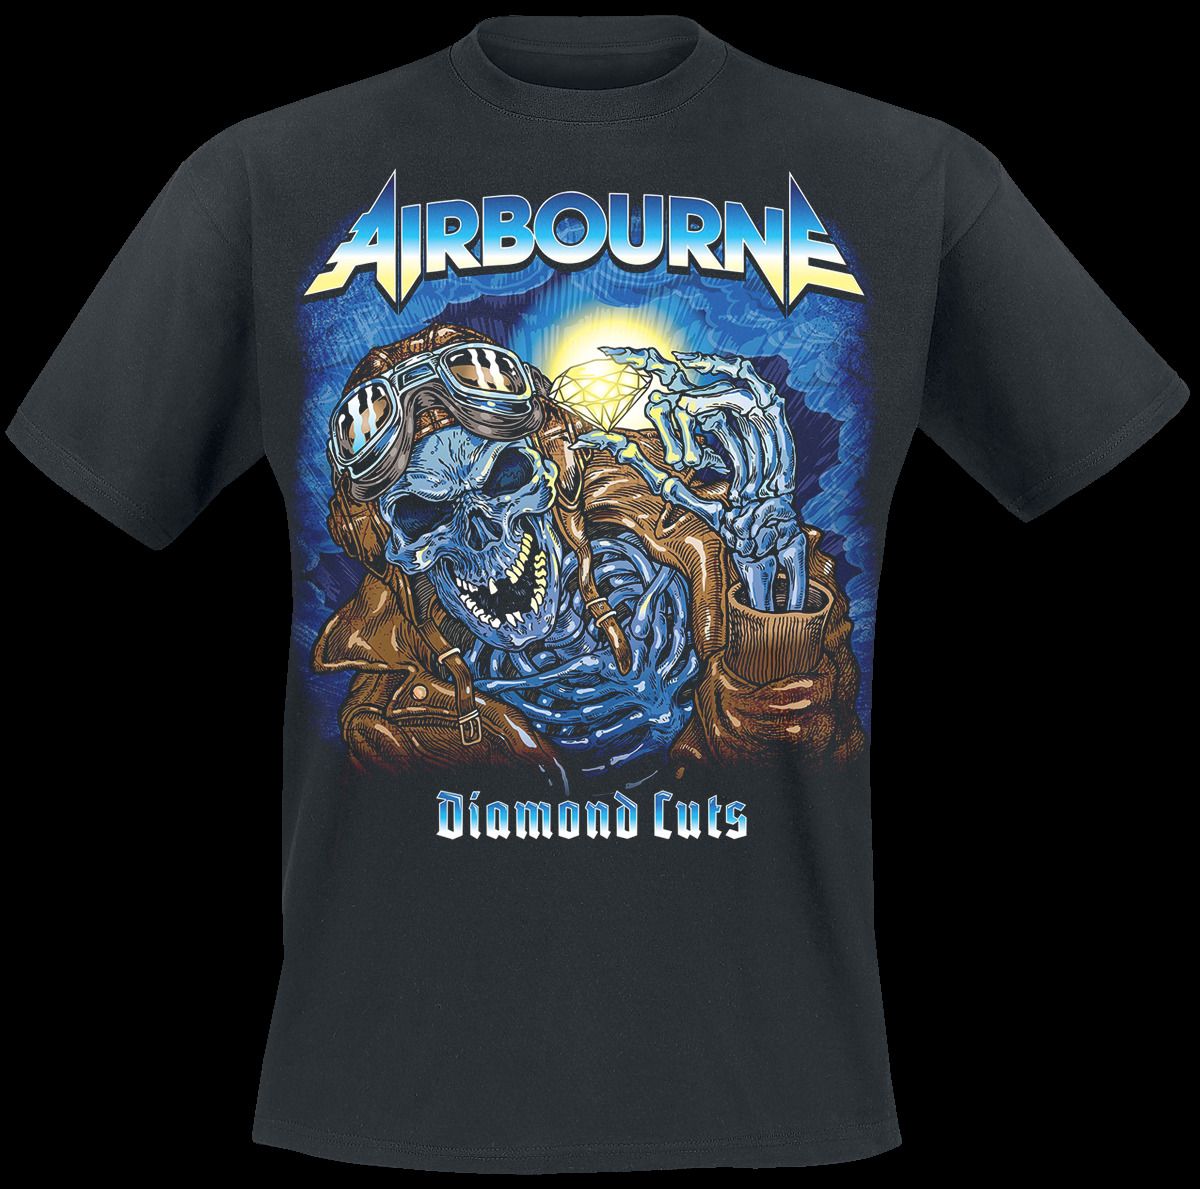 sort hul Meget sur Airbourne Diamond Cuts T-Shirt black Classic Quality High t-shirt Style  Round Style tshirt